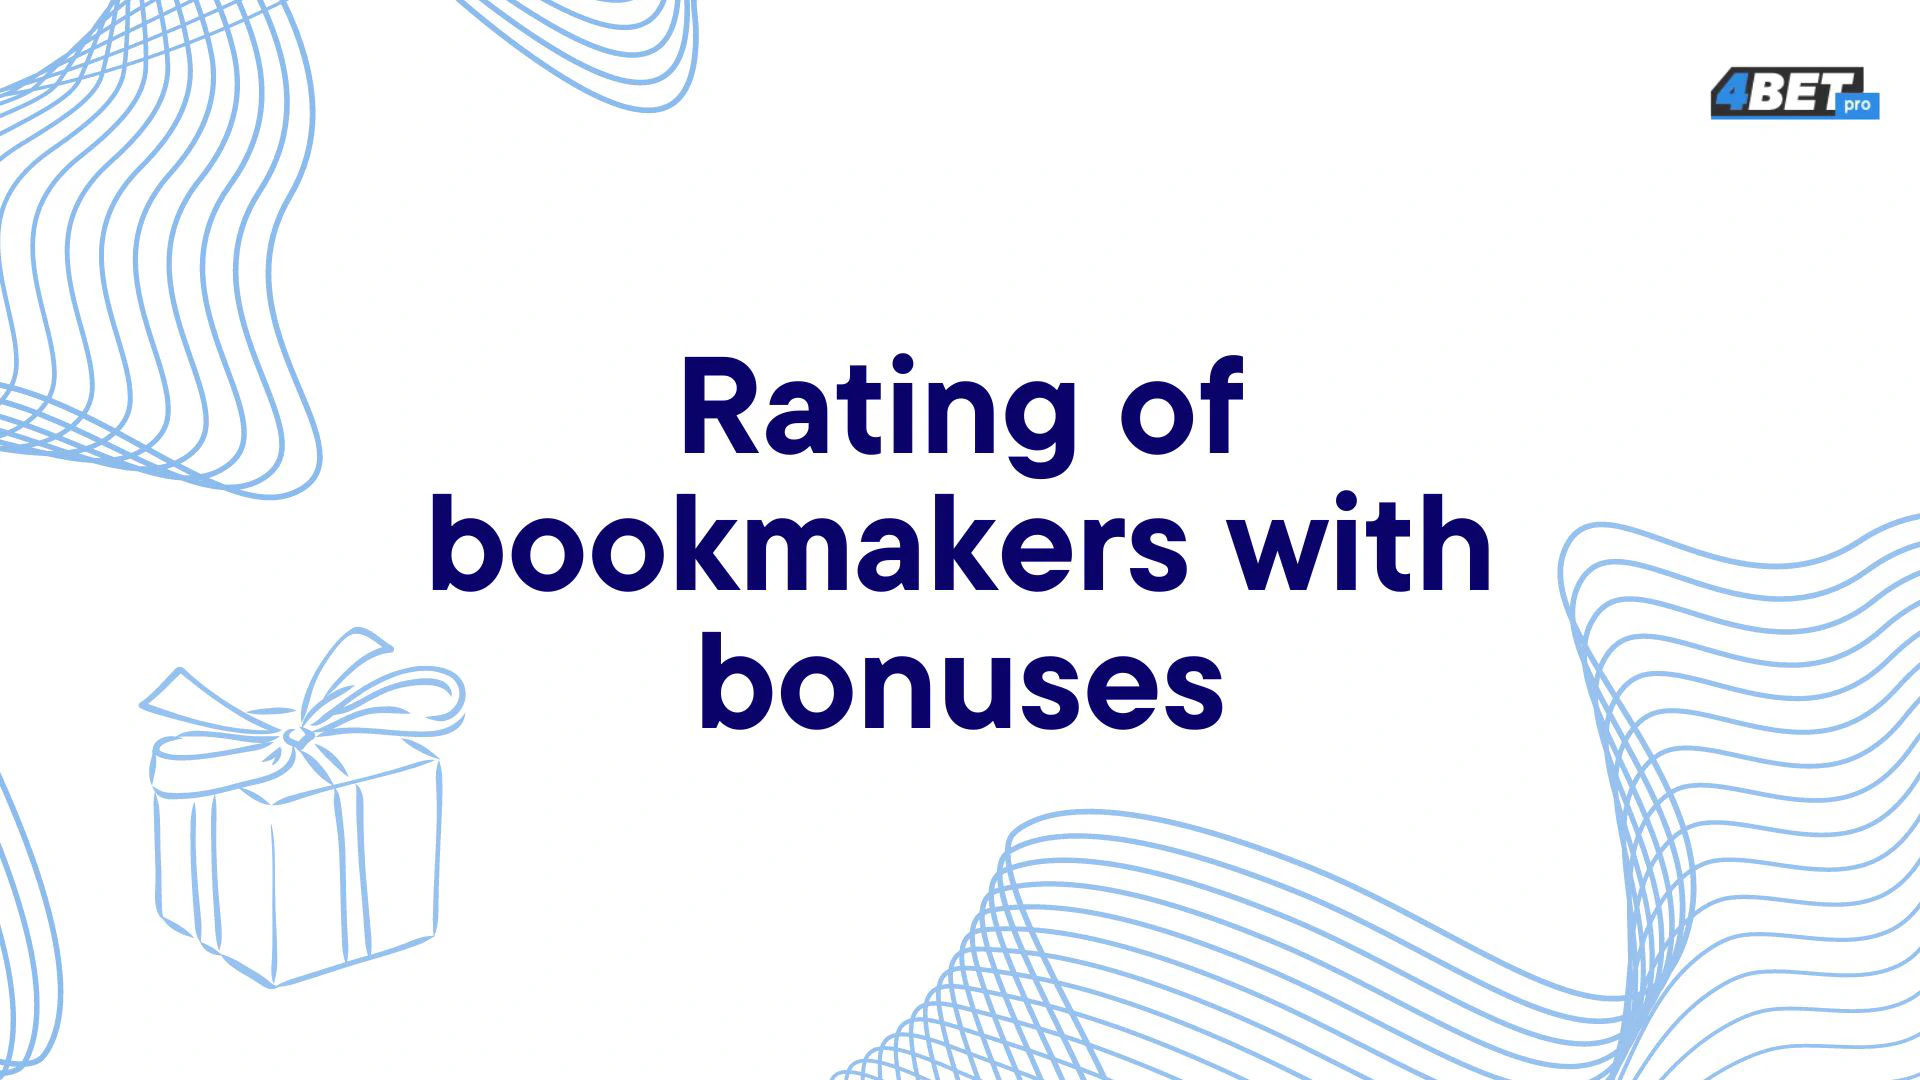 Bookmakers giving bonuses on registration